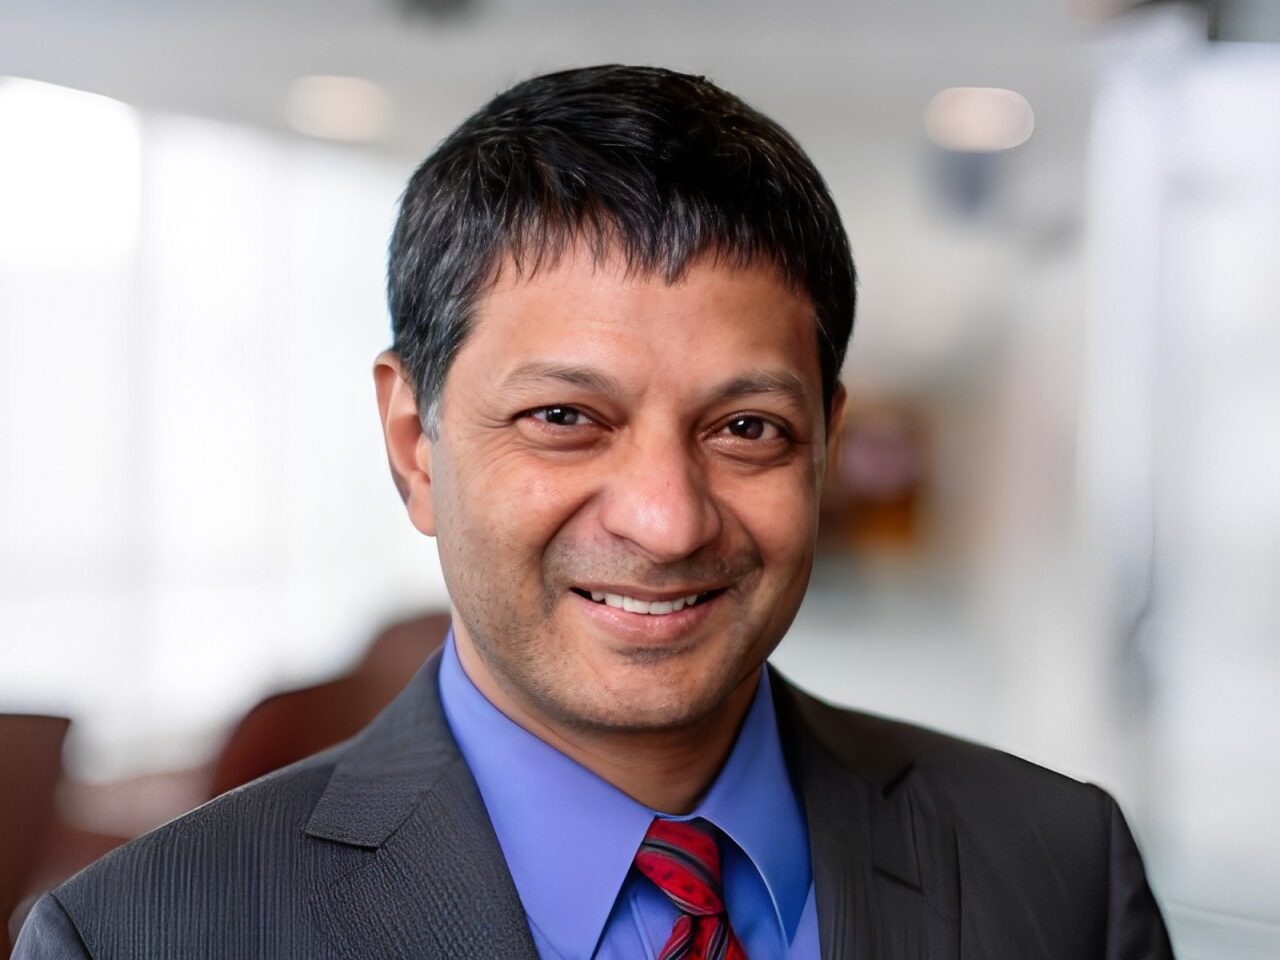 Vincent Rajkumar reflects on FDA approval of Dara-VRd for newly diagnosed myeloma